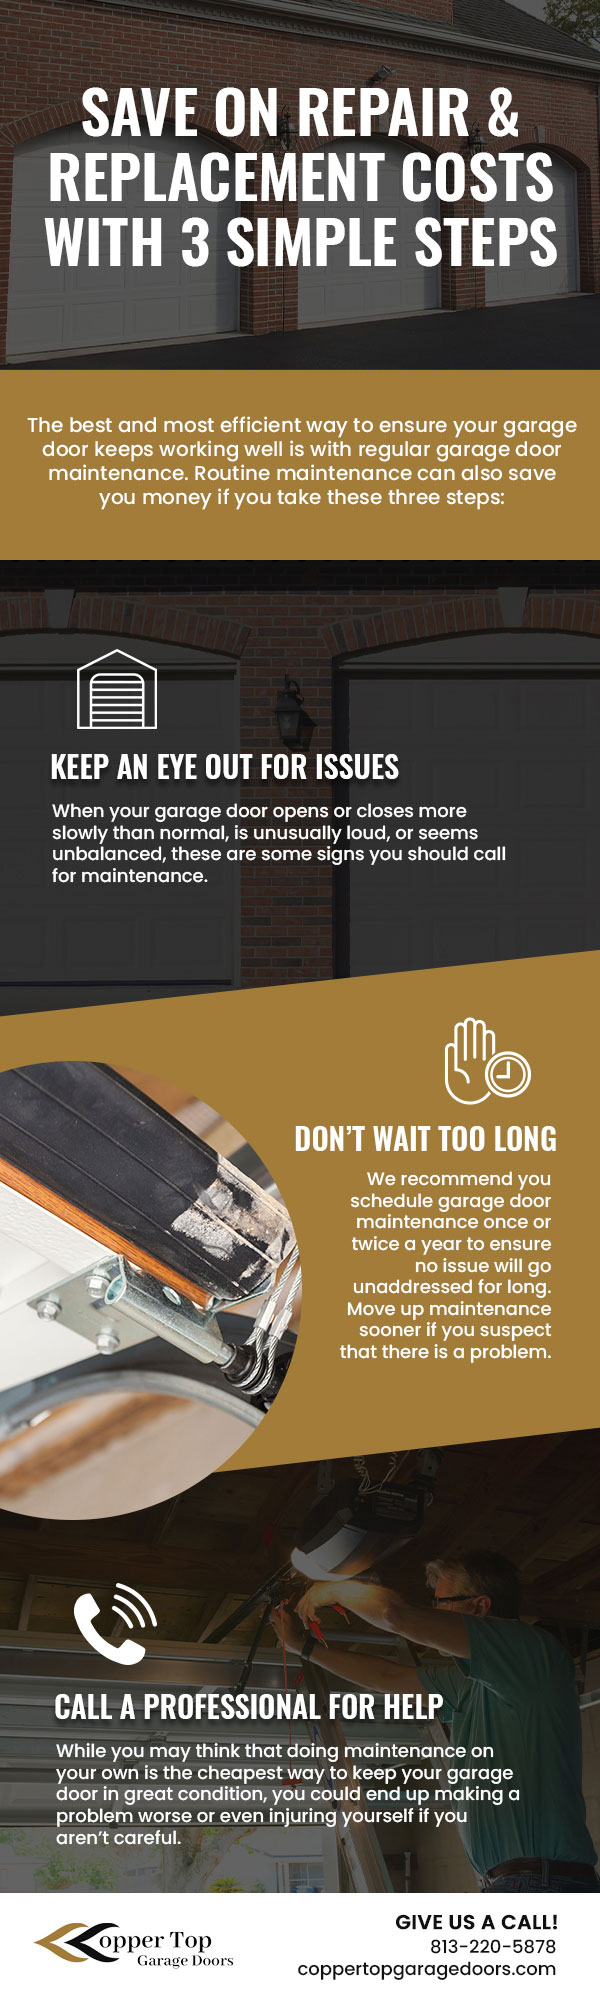 Garage Door Maintenance: Save on Repair & Replacement Costs with 3 Simple Steps